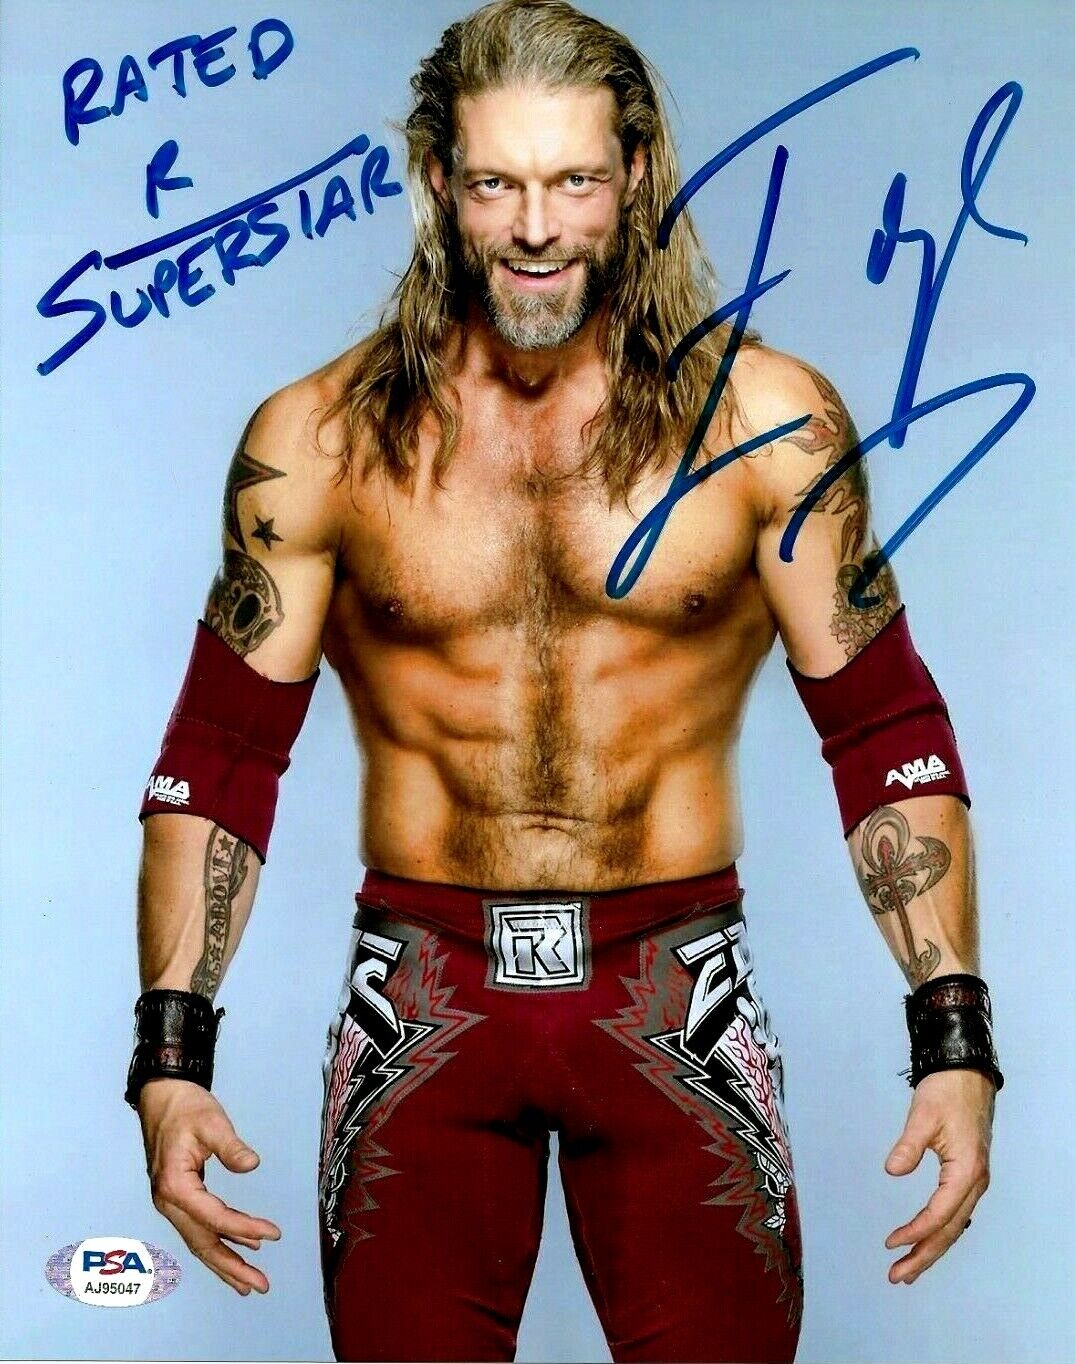 WWE EDGE HAND SIGNED RATED R SUPERSTAR INSCRIBED 8X10 Photo Poster painting WITH PSA DNA COA 2